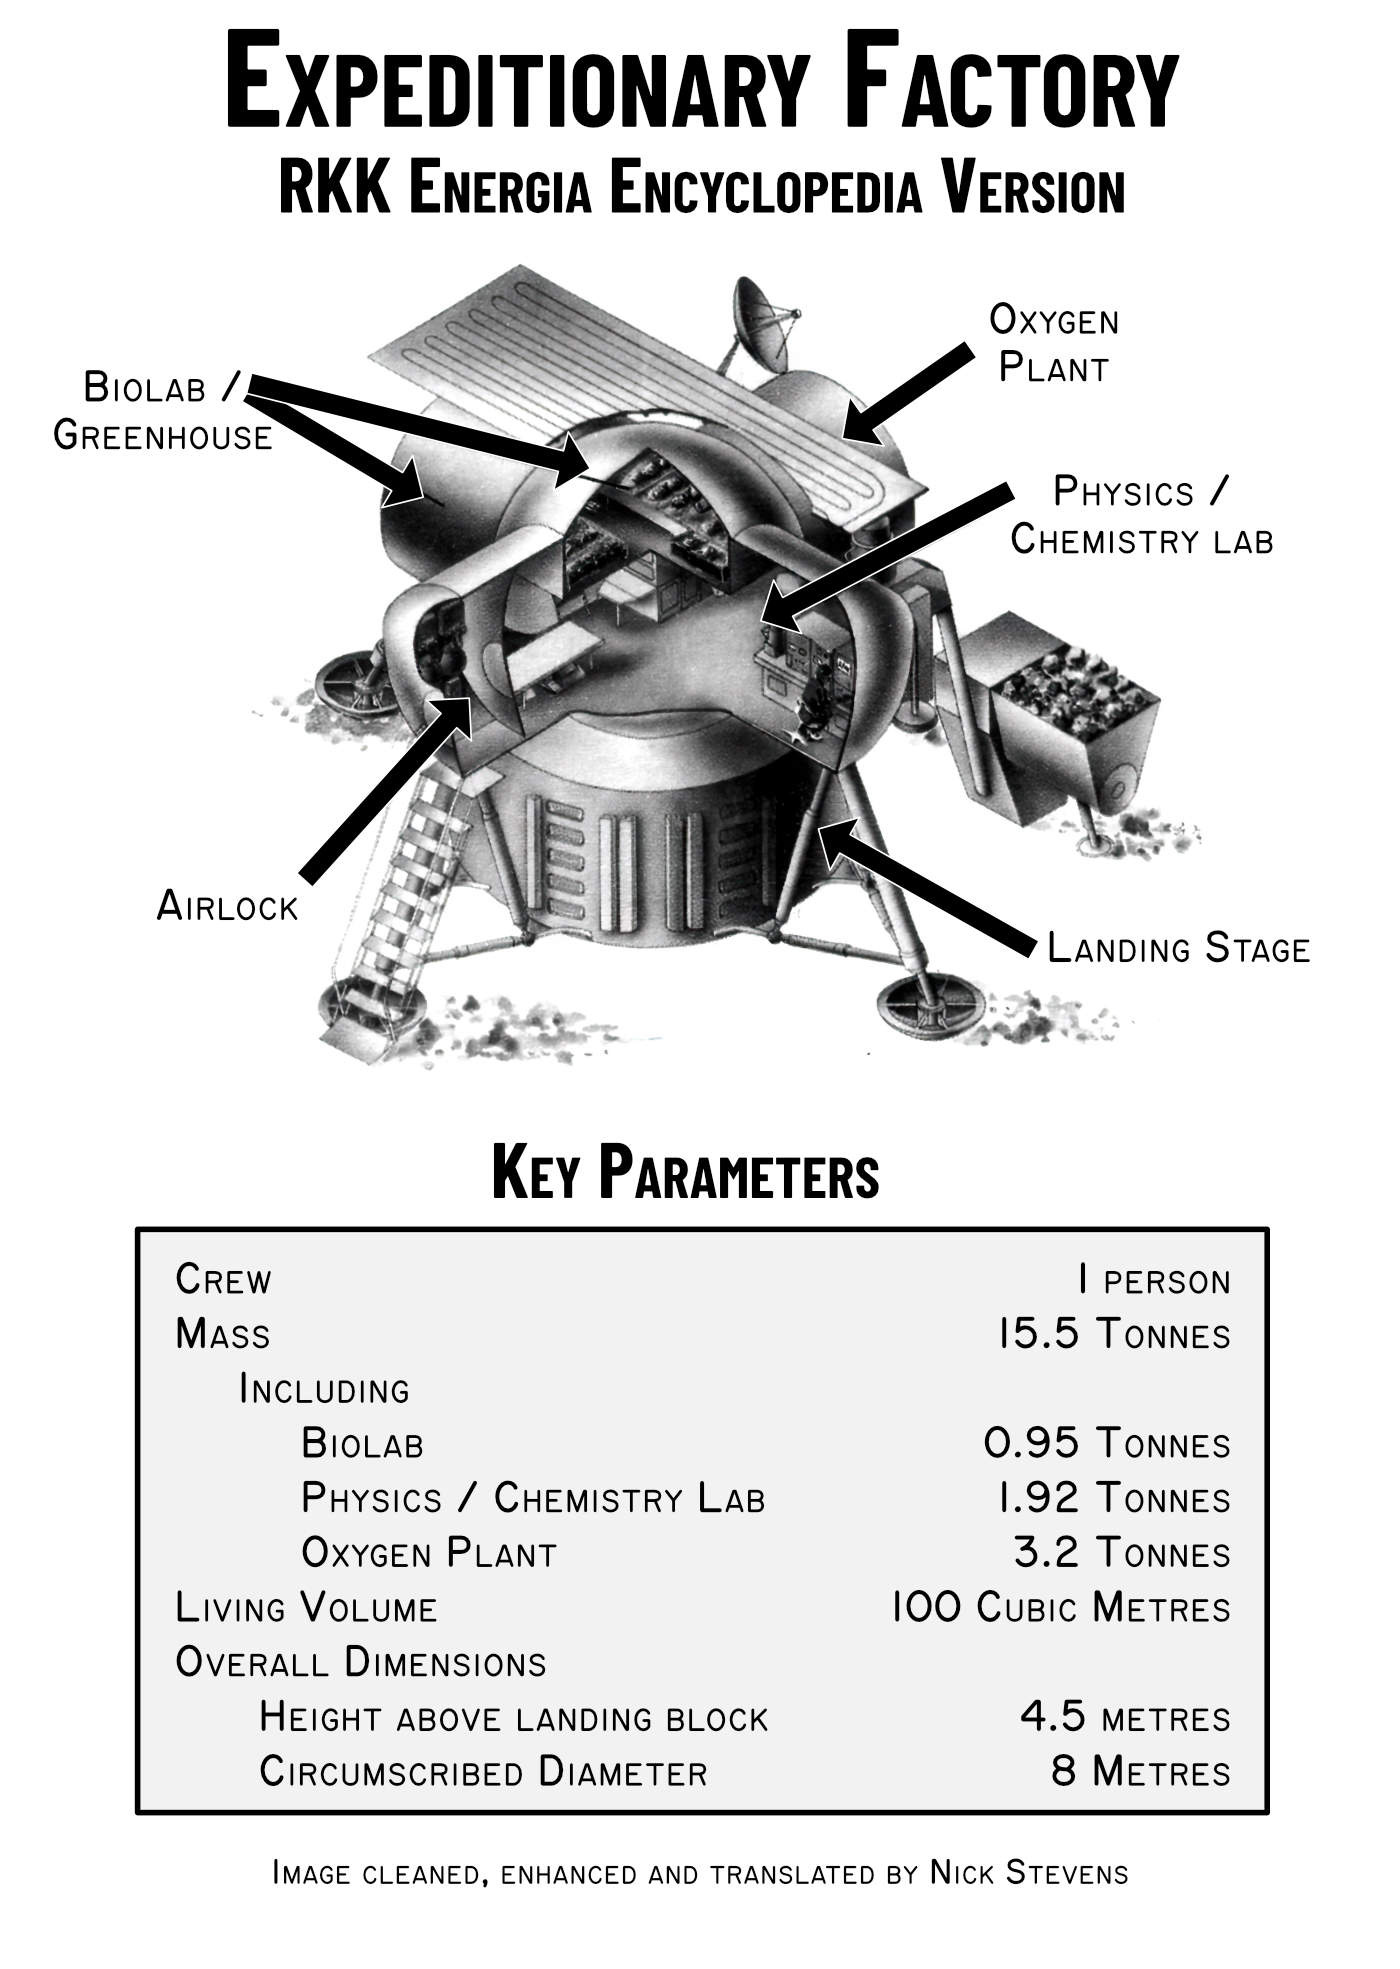 The Lunar Expeditionary Factory - by Nick Stevens Graphics